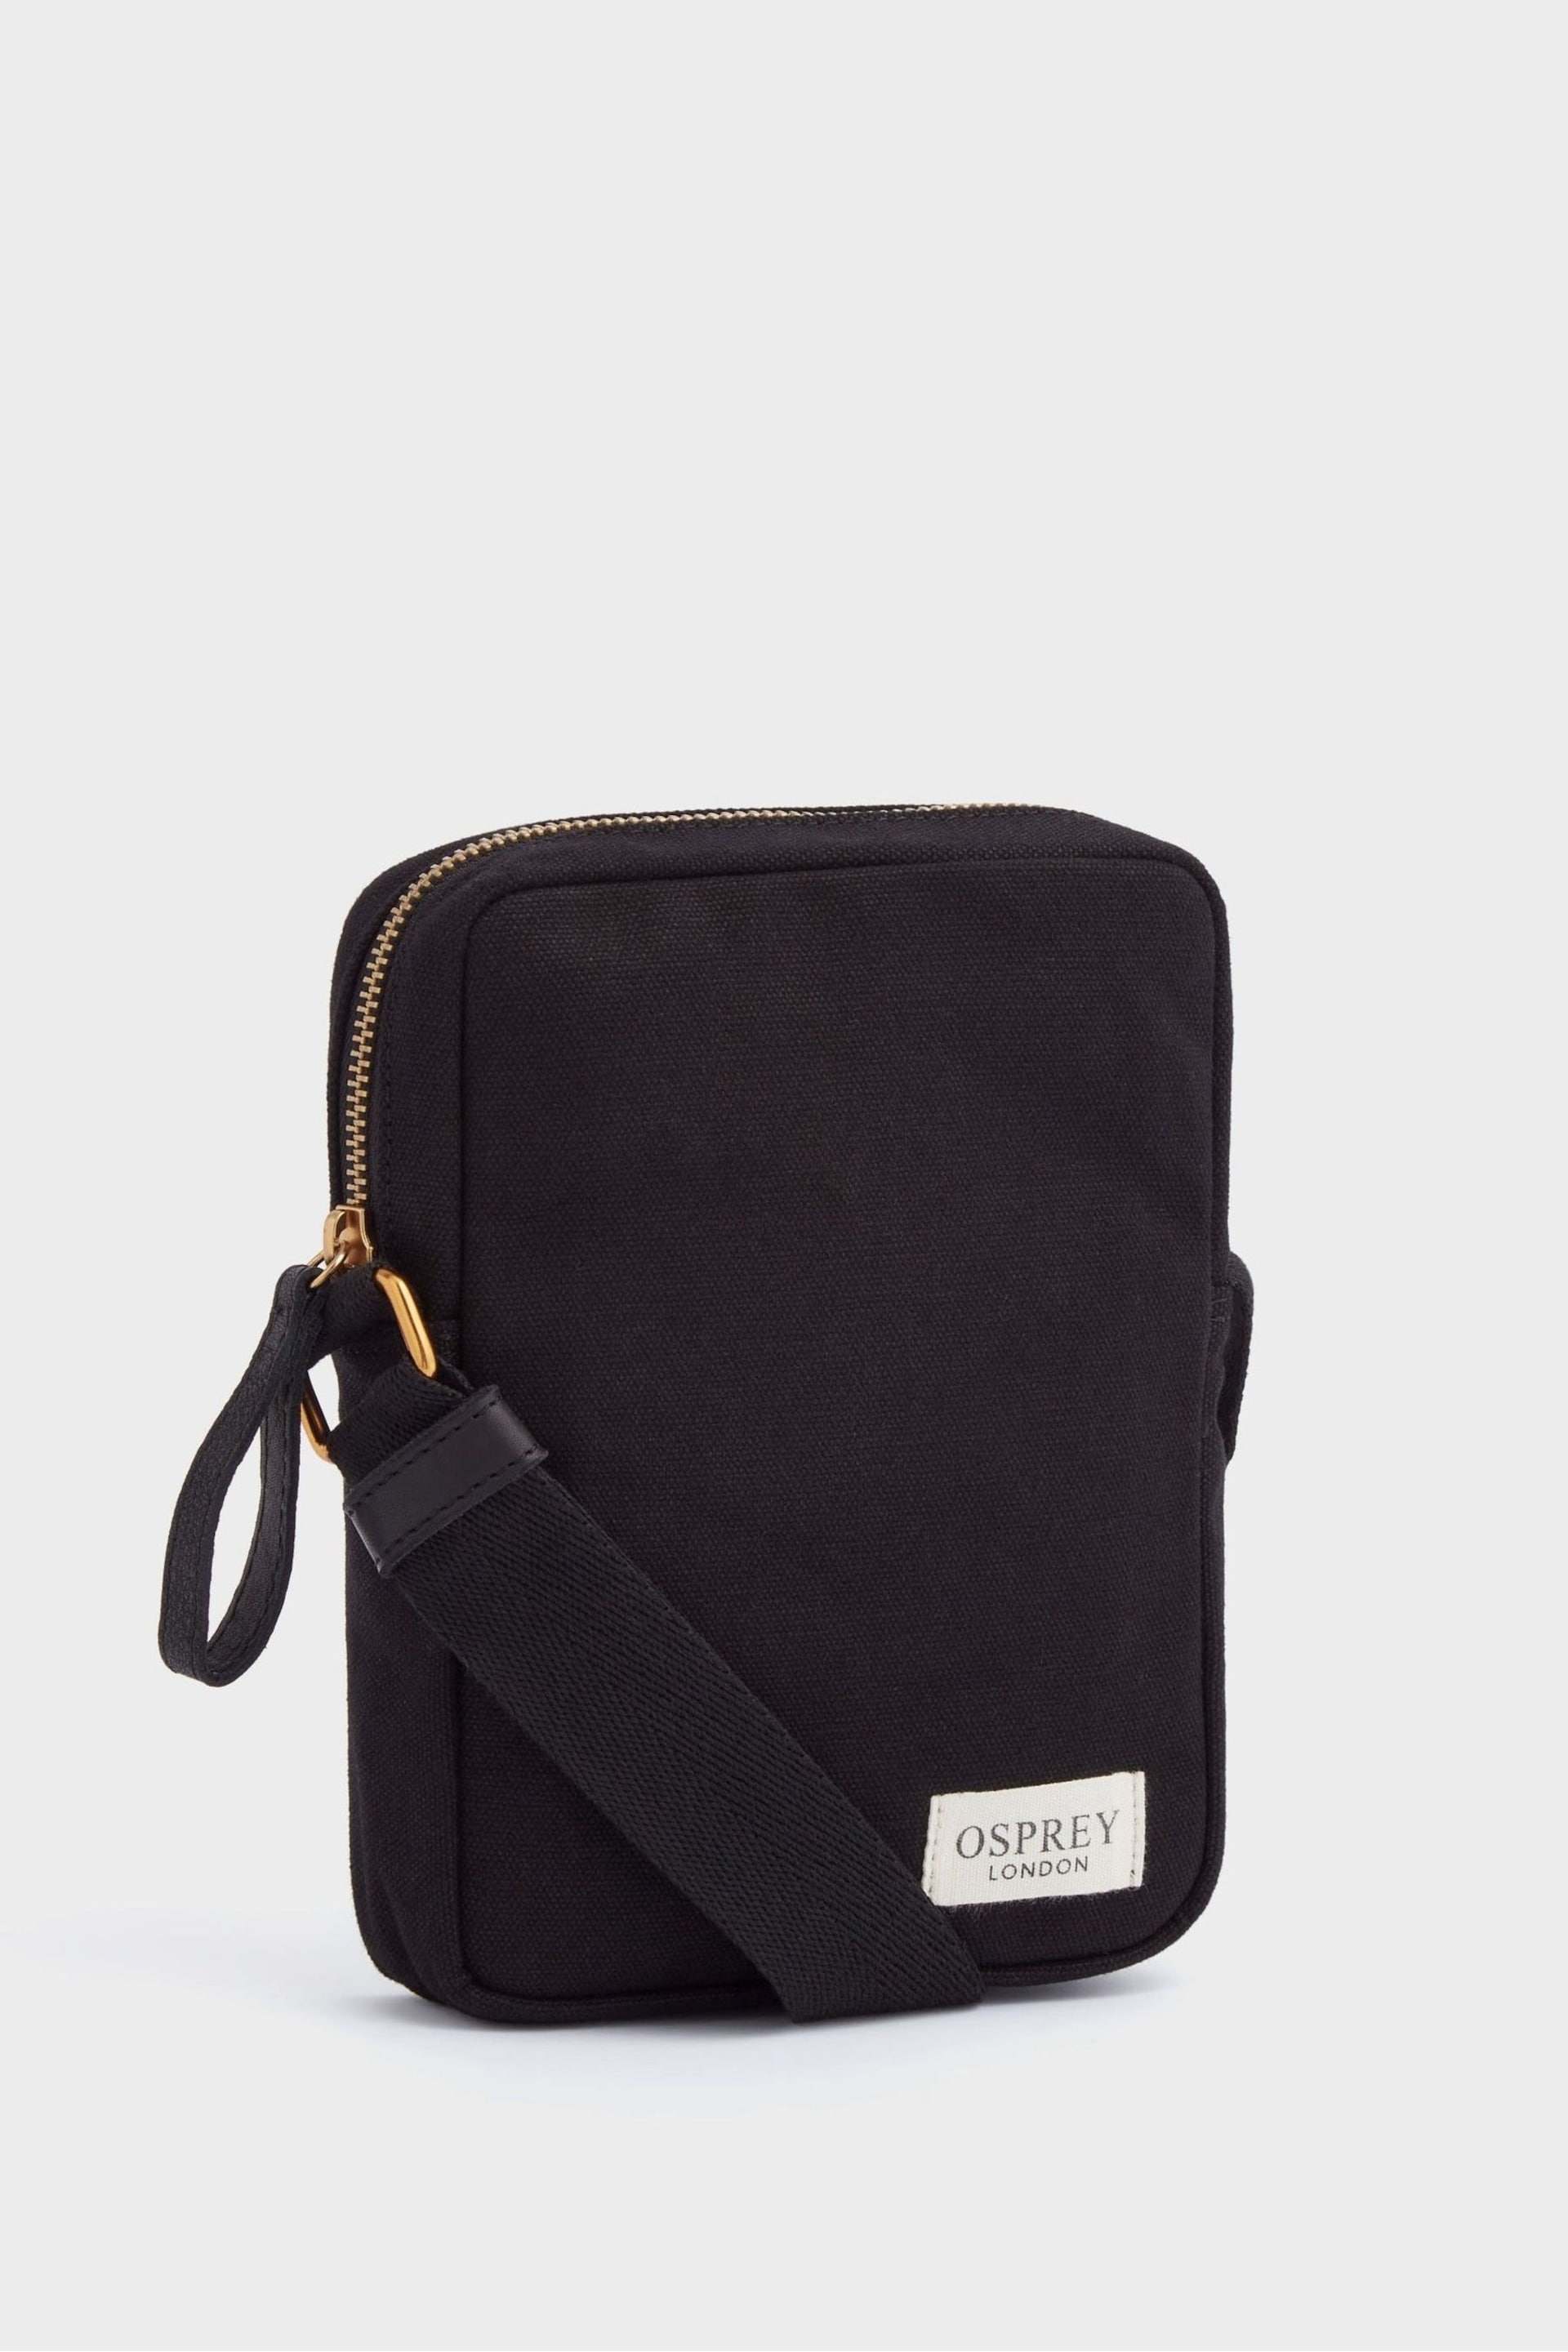 OSPREY LONDON The Studio Packable Phone Bag - Image 3 of 7